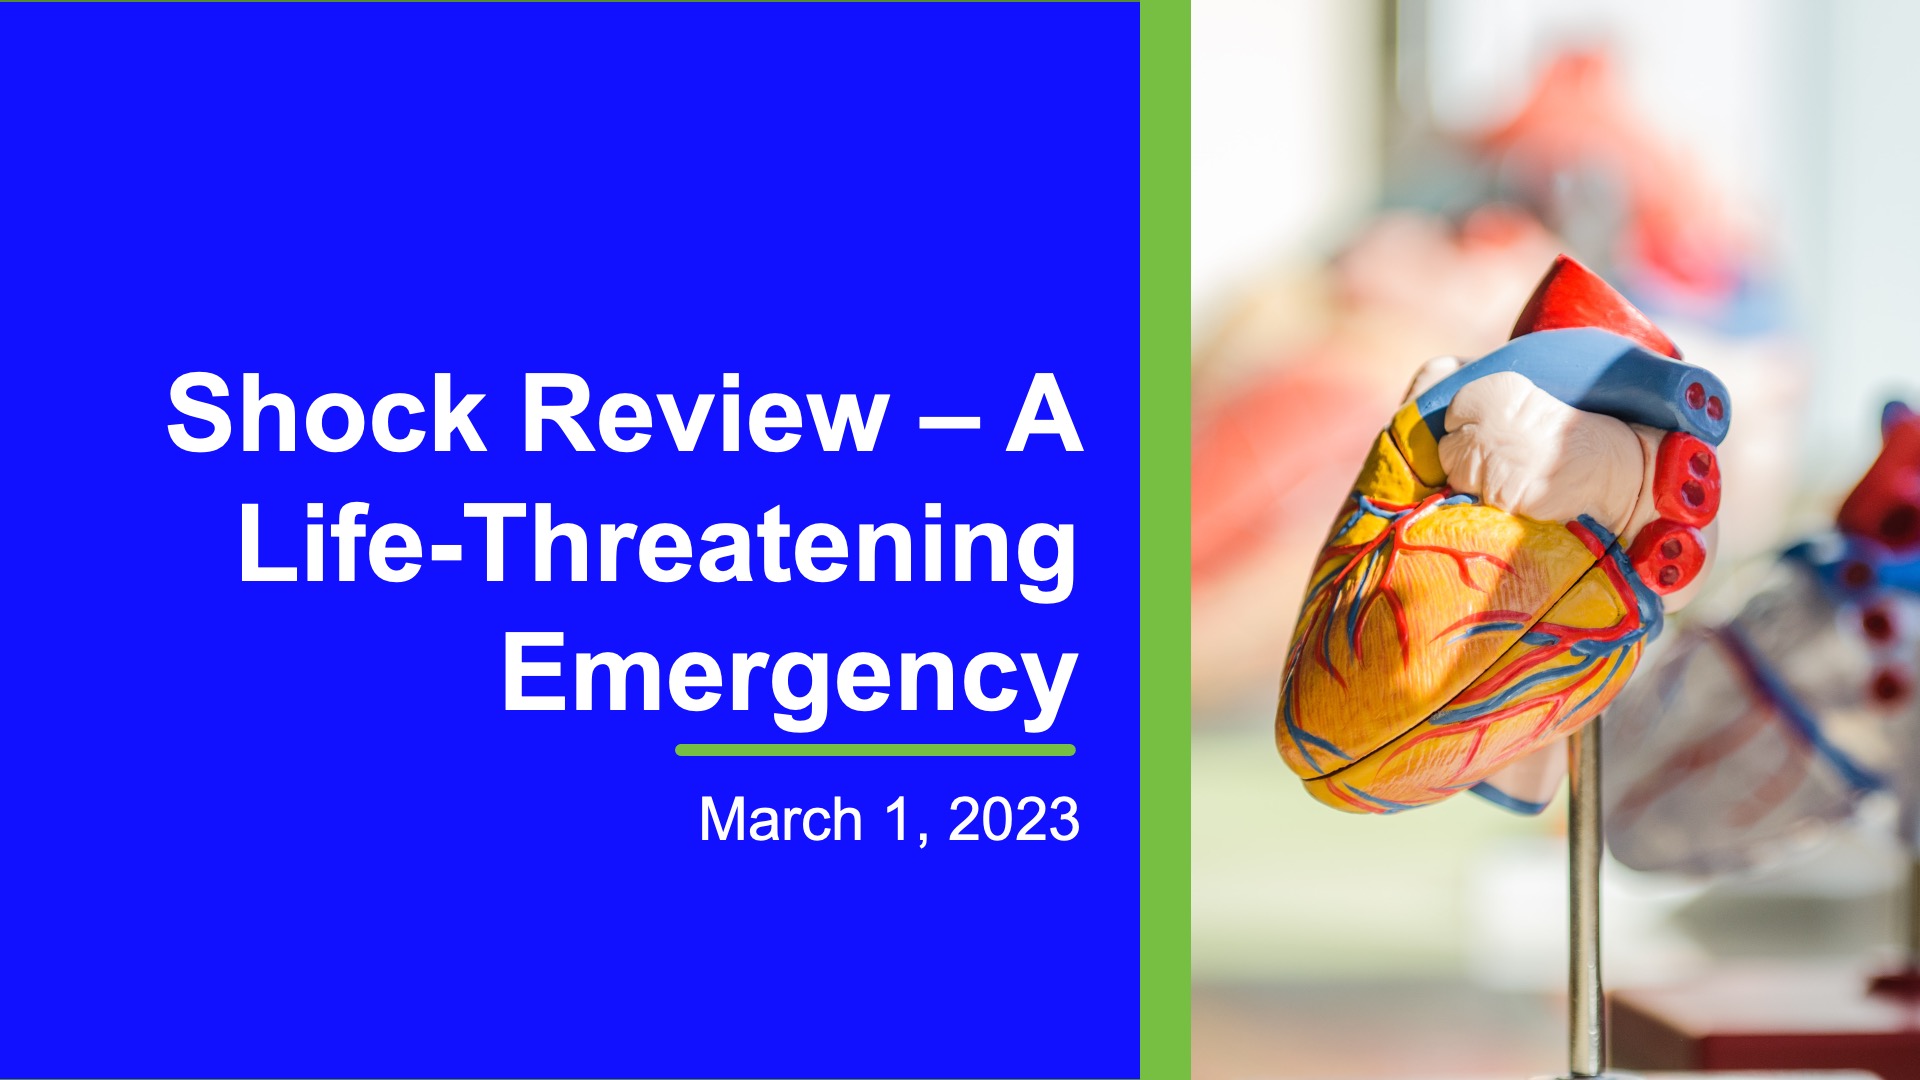 Shock Review – A Life-Threatening Emergency